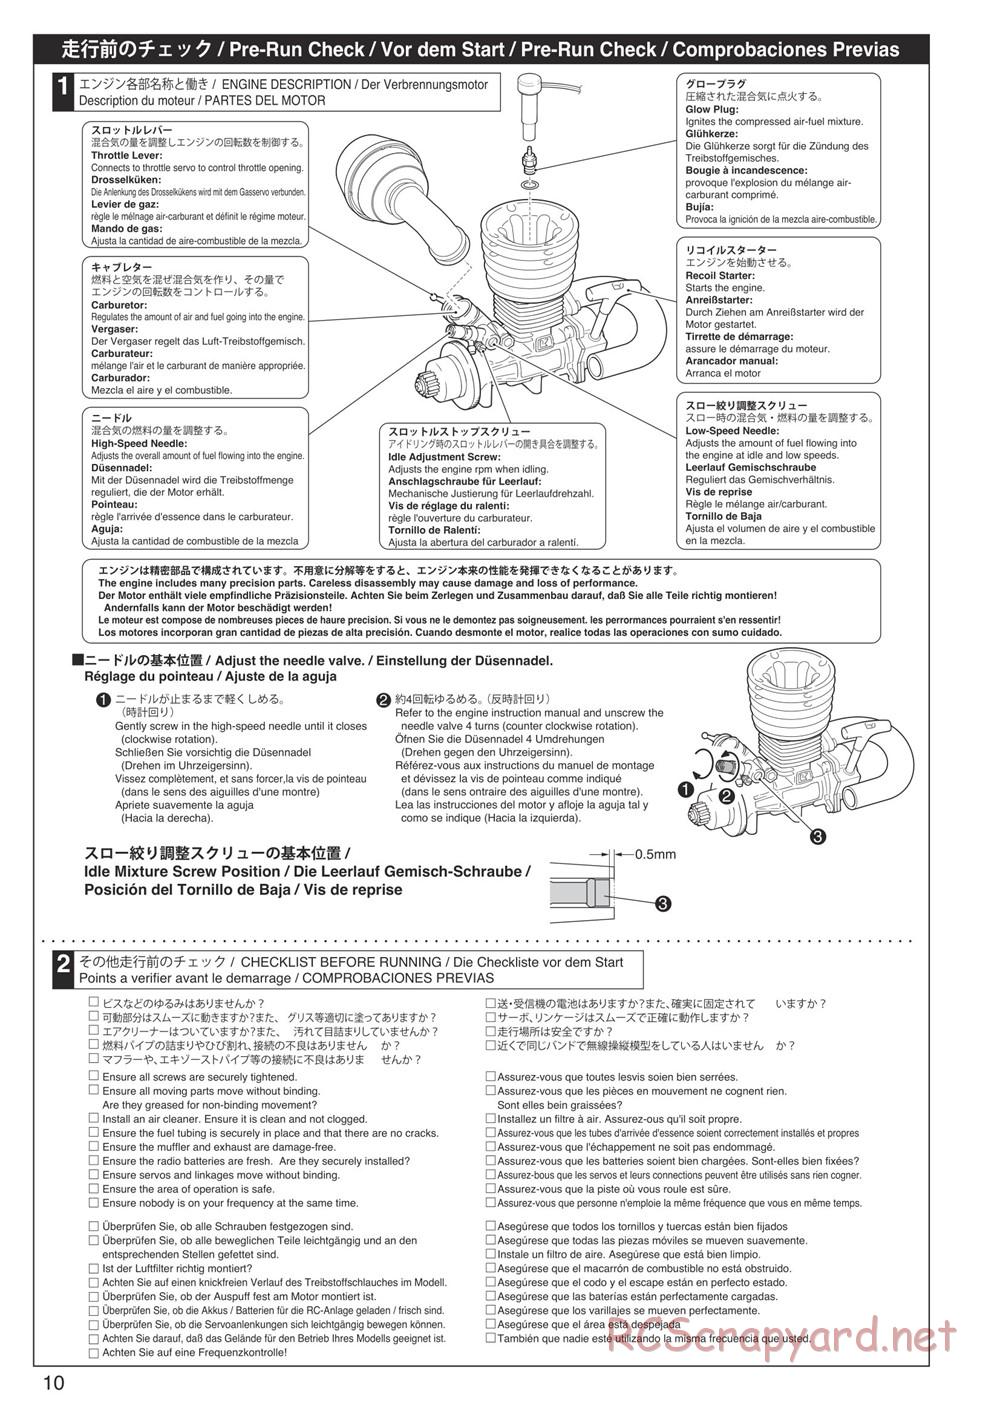 Kyosho - Inferno Neo - Manual - Page 10